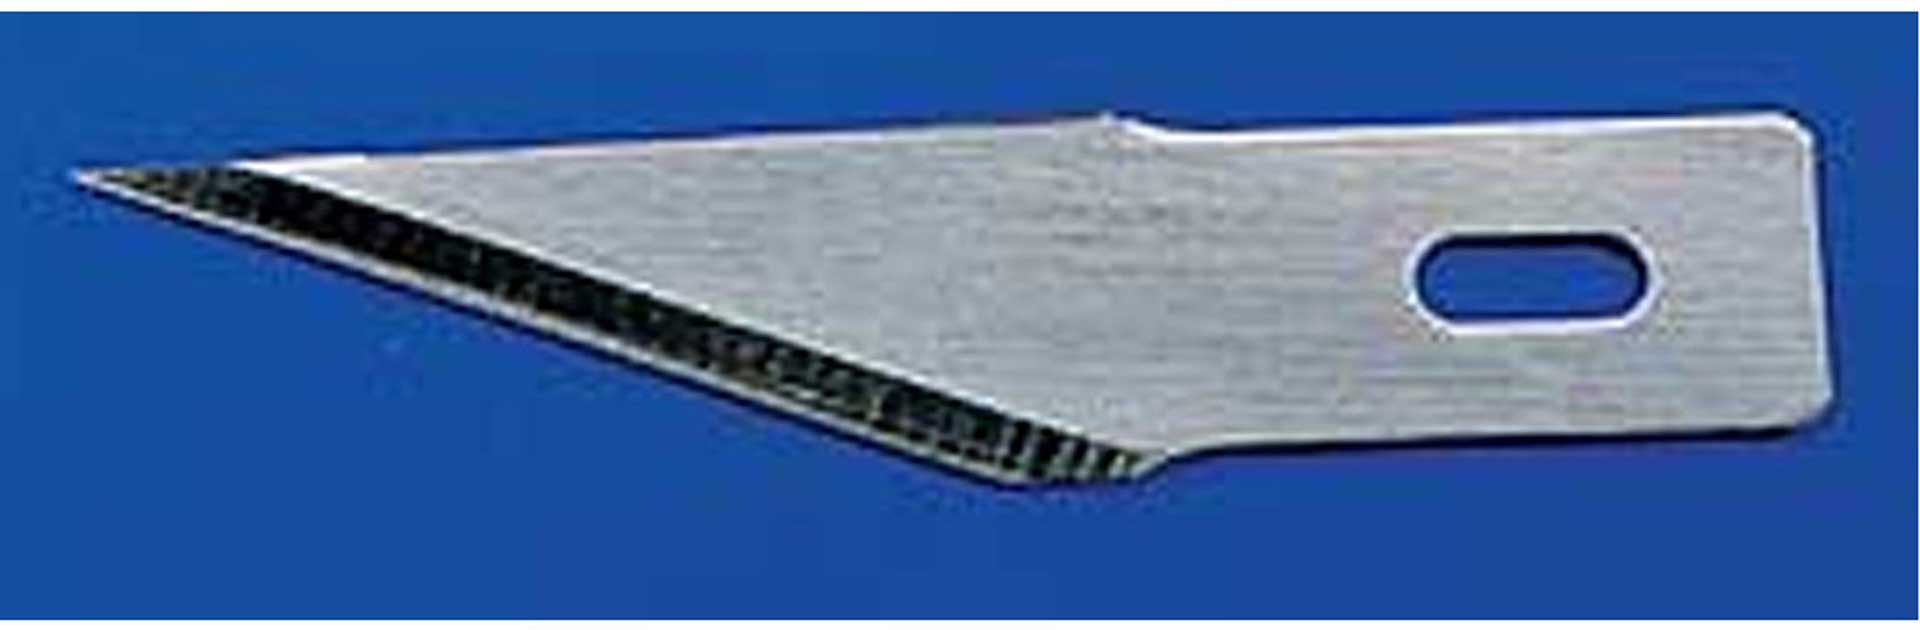 EXCEL SPARE BLADE POINTED B2 5PCS.